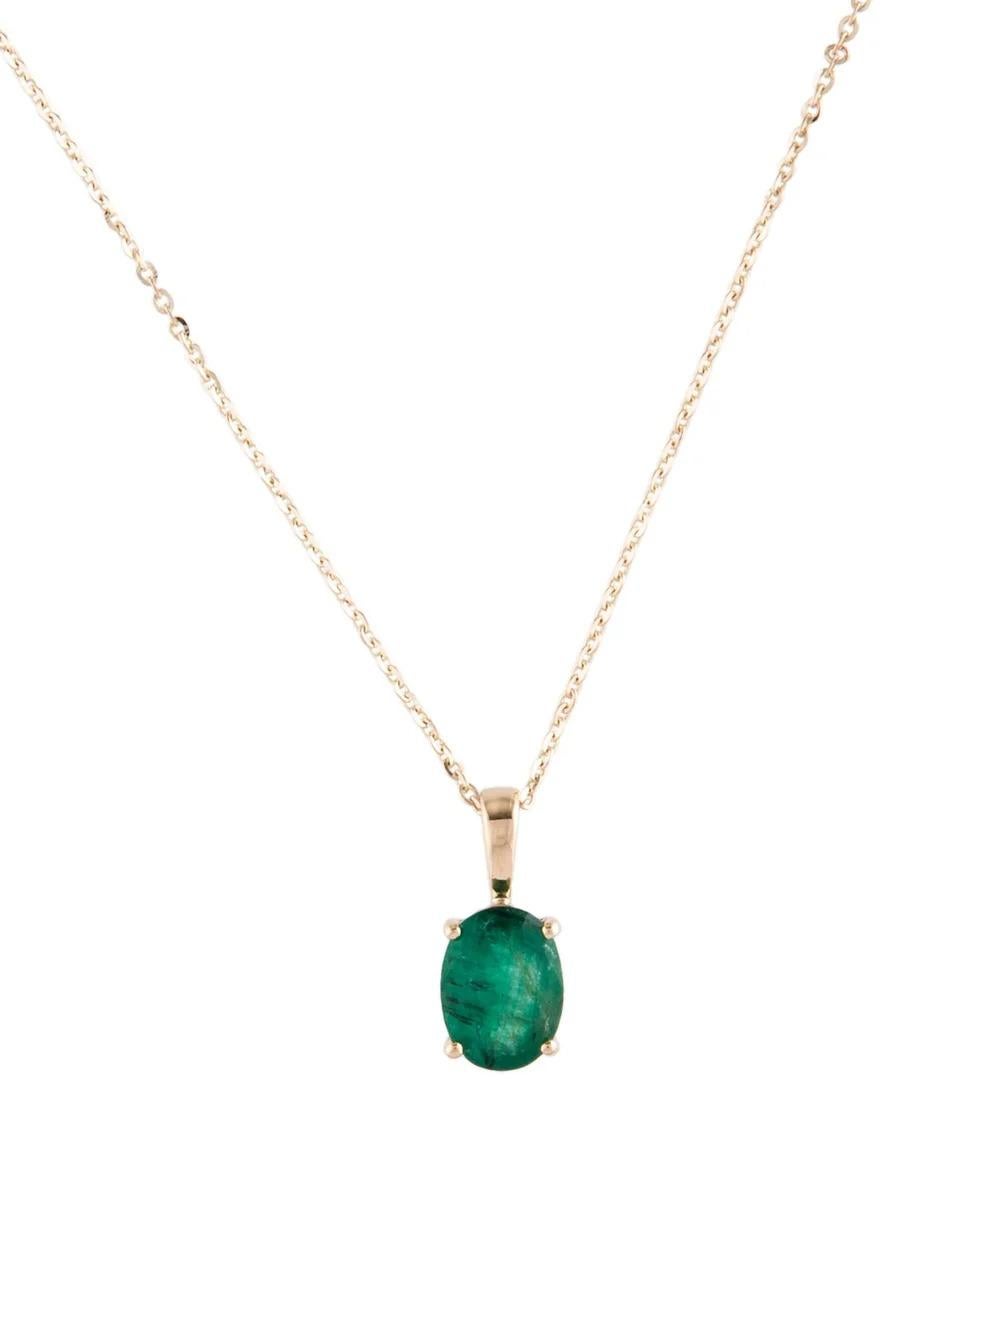 Experience timeless elegance with this exquisite 14K yellow gold pendant necklace featuring a stunning 0.94 carat oval brilliant emerald. Crafted to perfection, this piece radiates sophistication and luxury.

Specifications:

* Metal Type: 14K